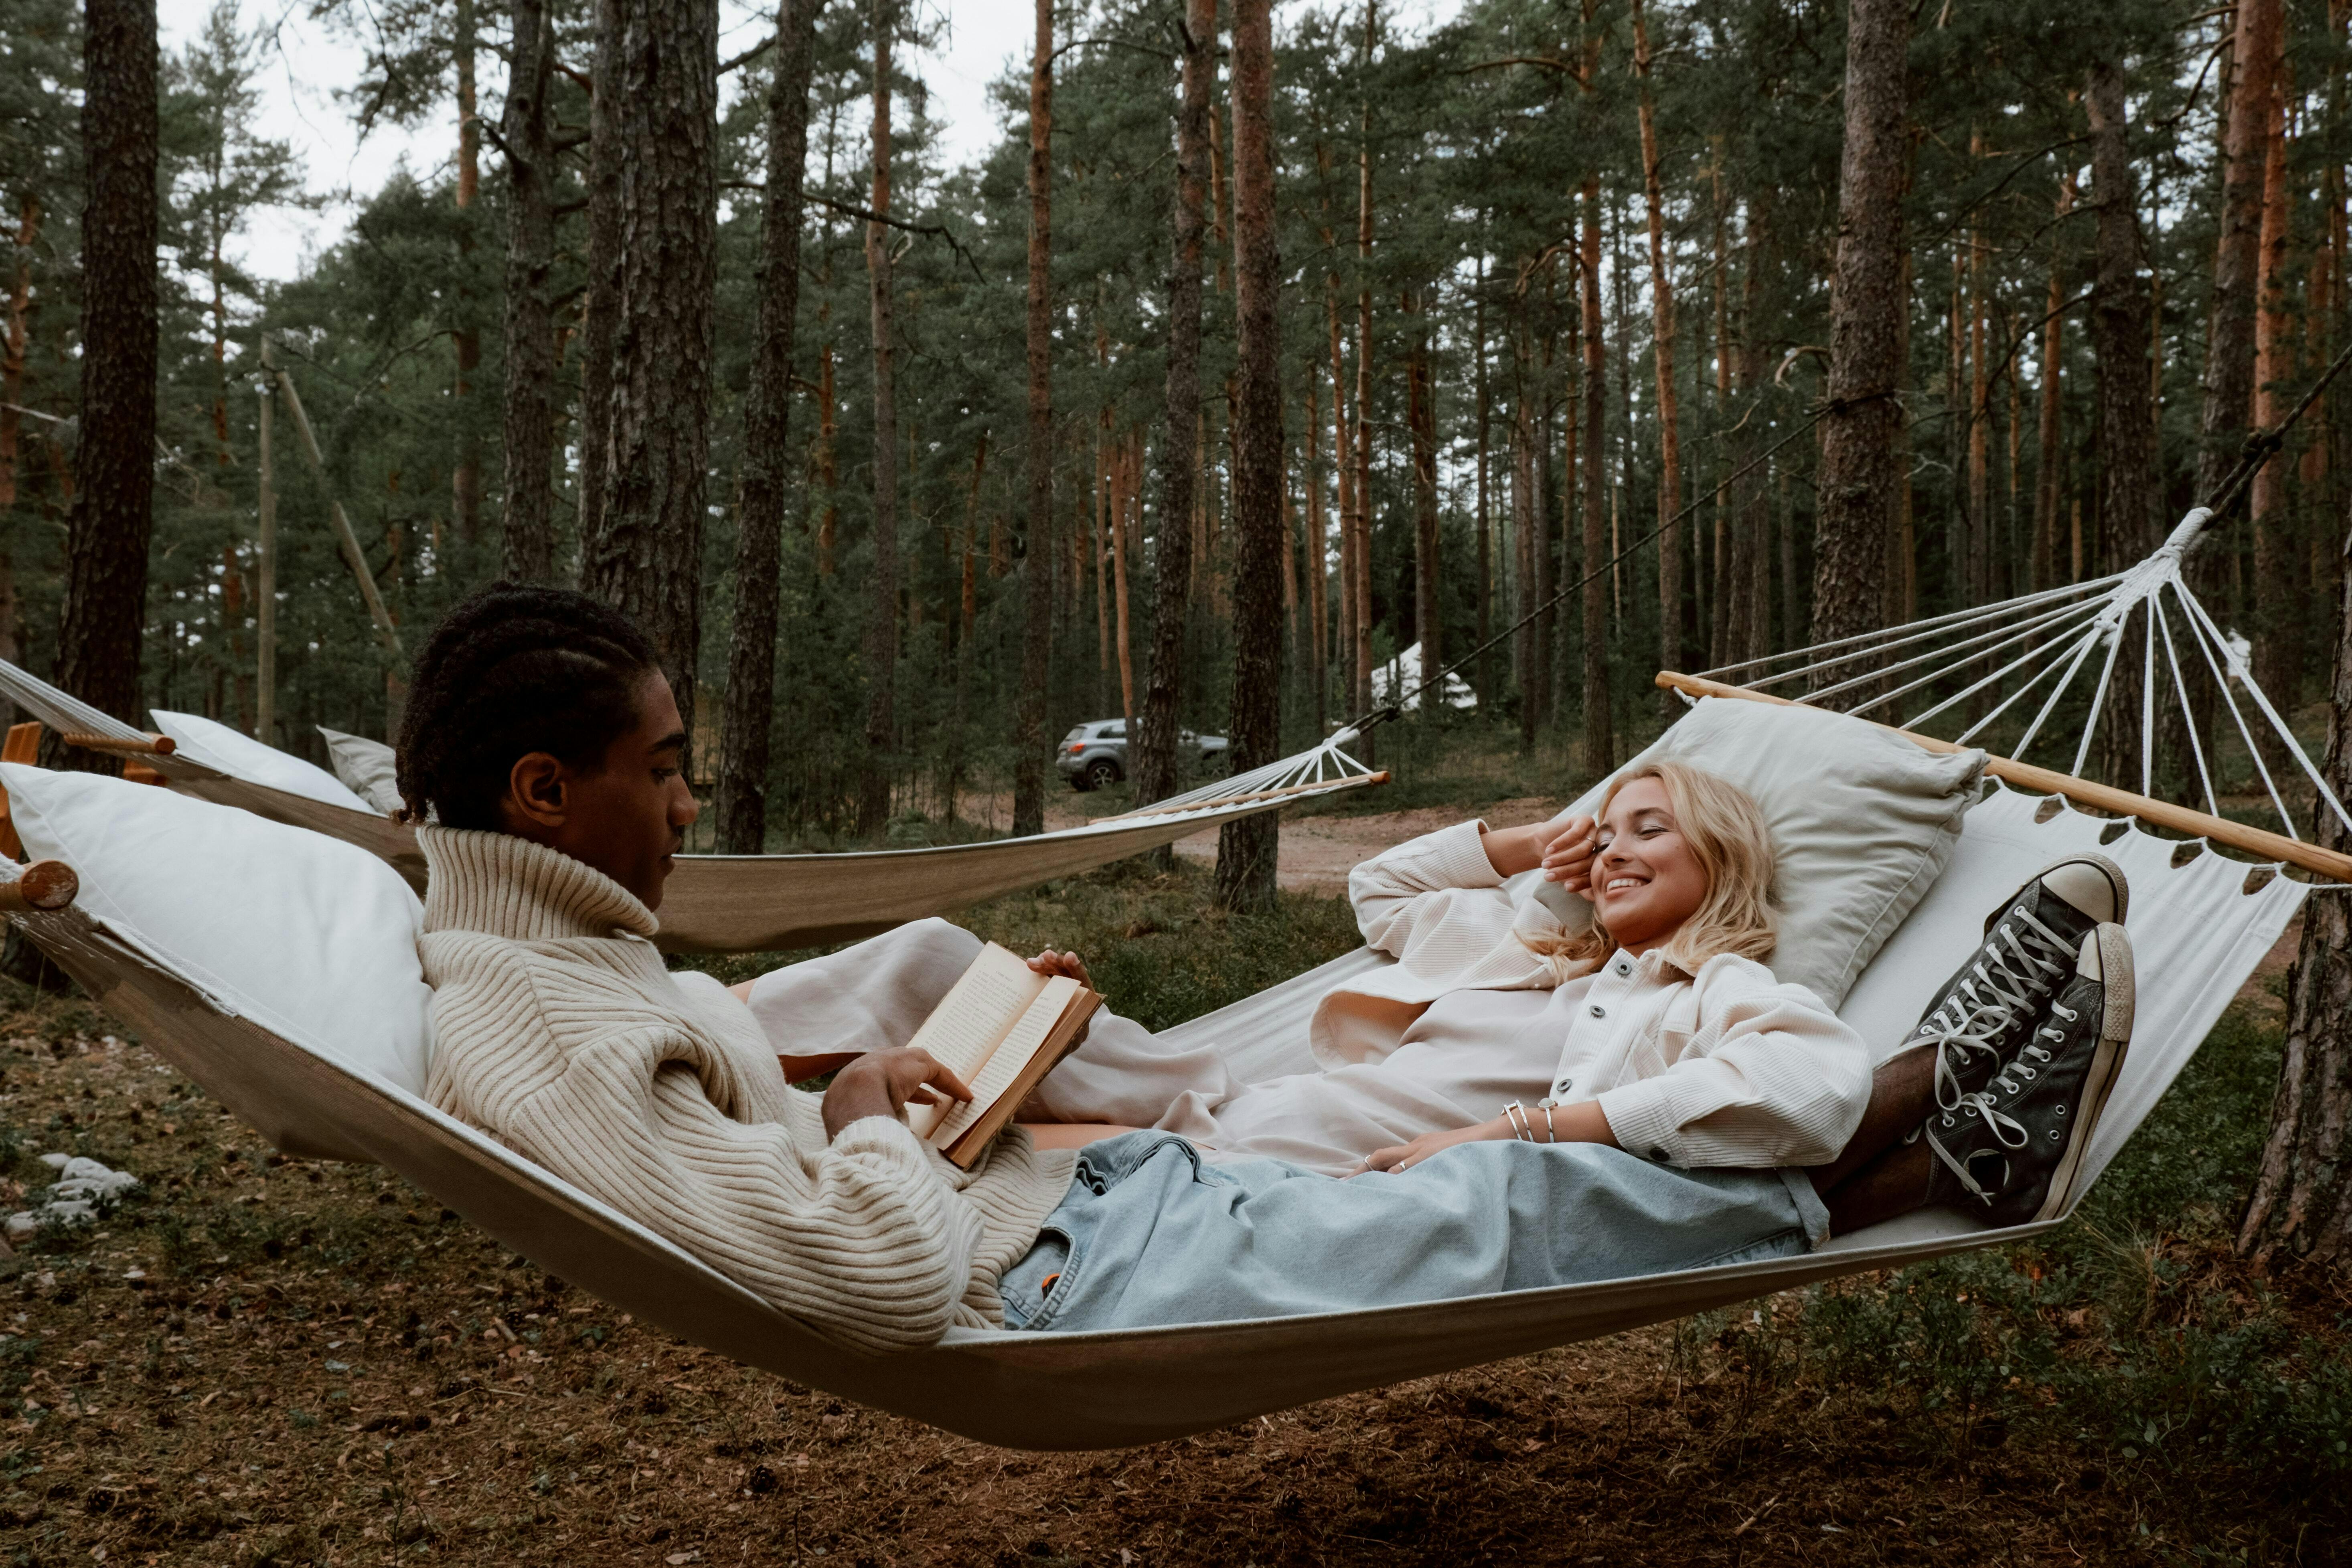 Two people in a hammock. One is reading a book and one is laughing.